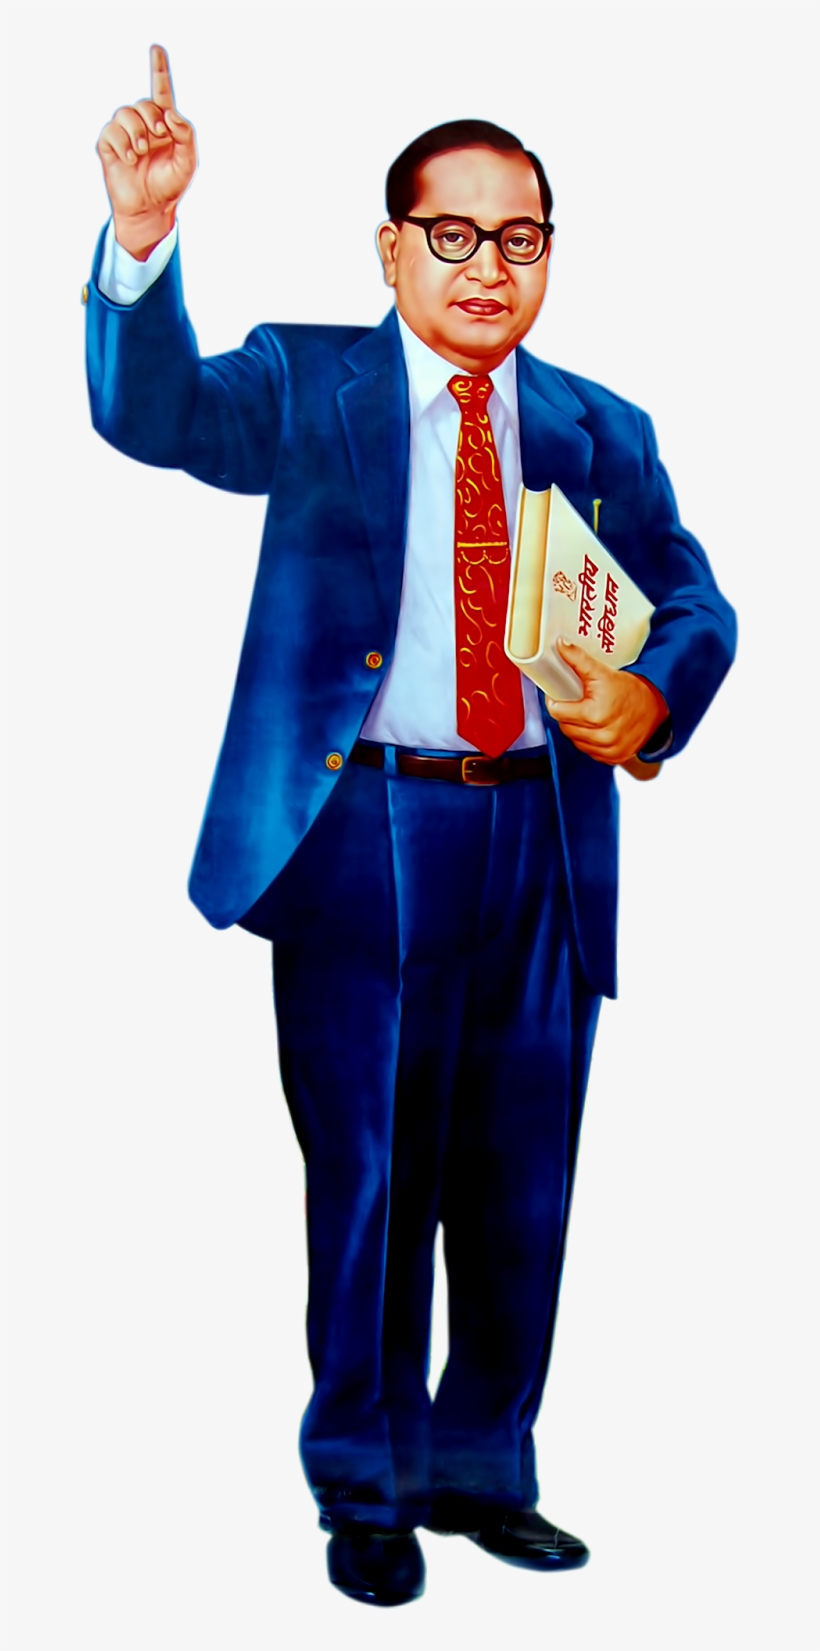 br ambedkar photos wallpapers,standing,electric blue,suit,thumb,finger